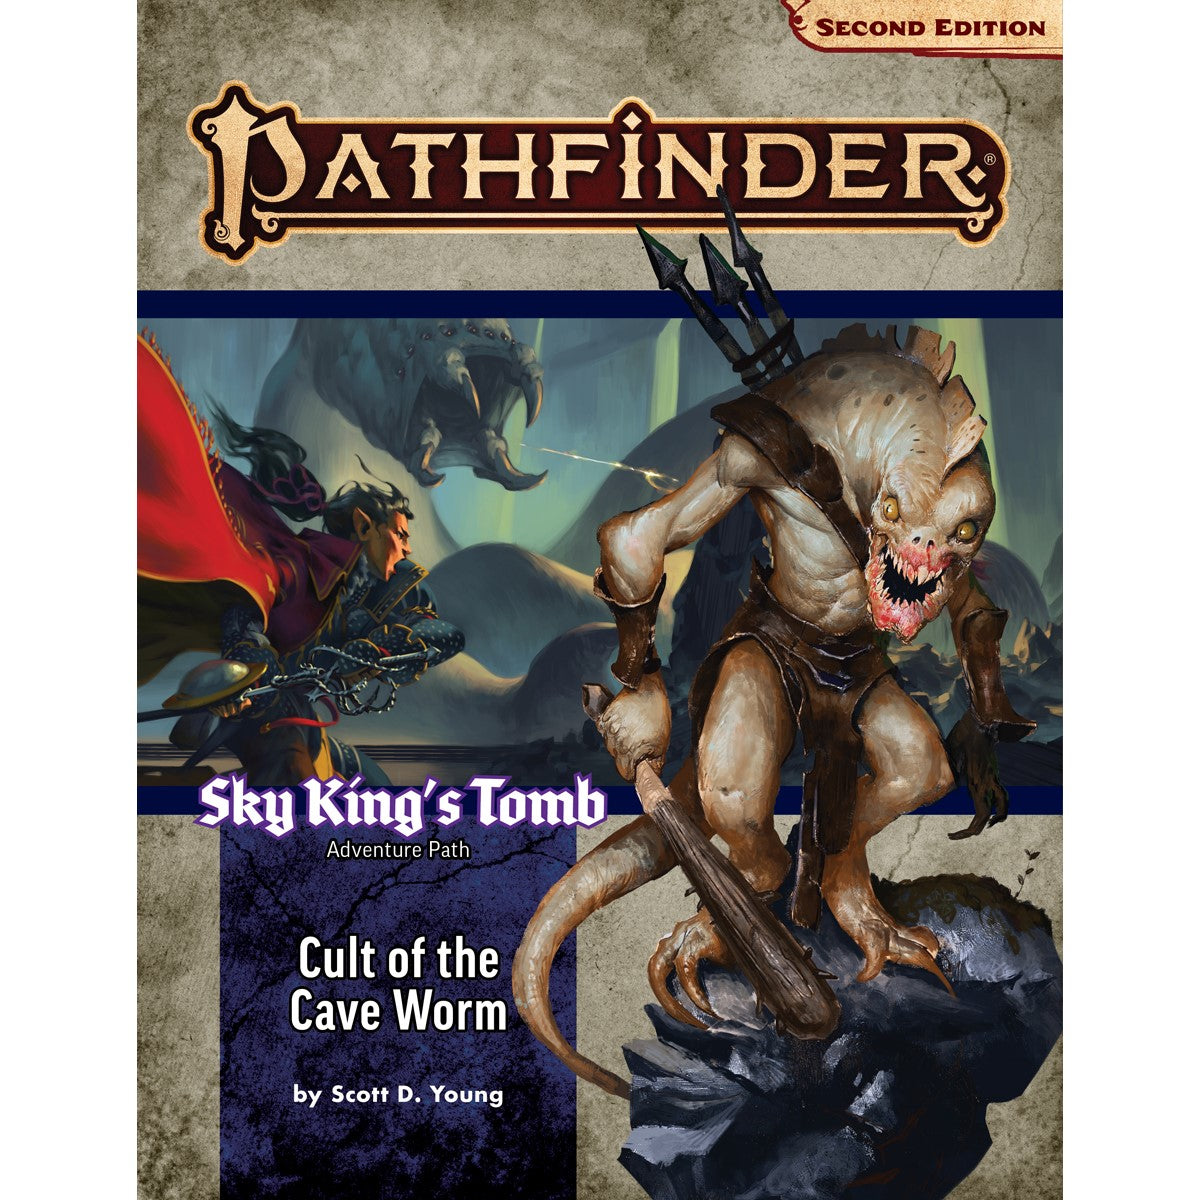 Pathfinder Second Edition Adventure Path: Sky King’s Tomb #2 Cult of the Cave Worm